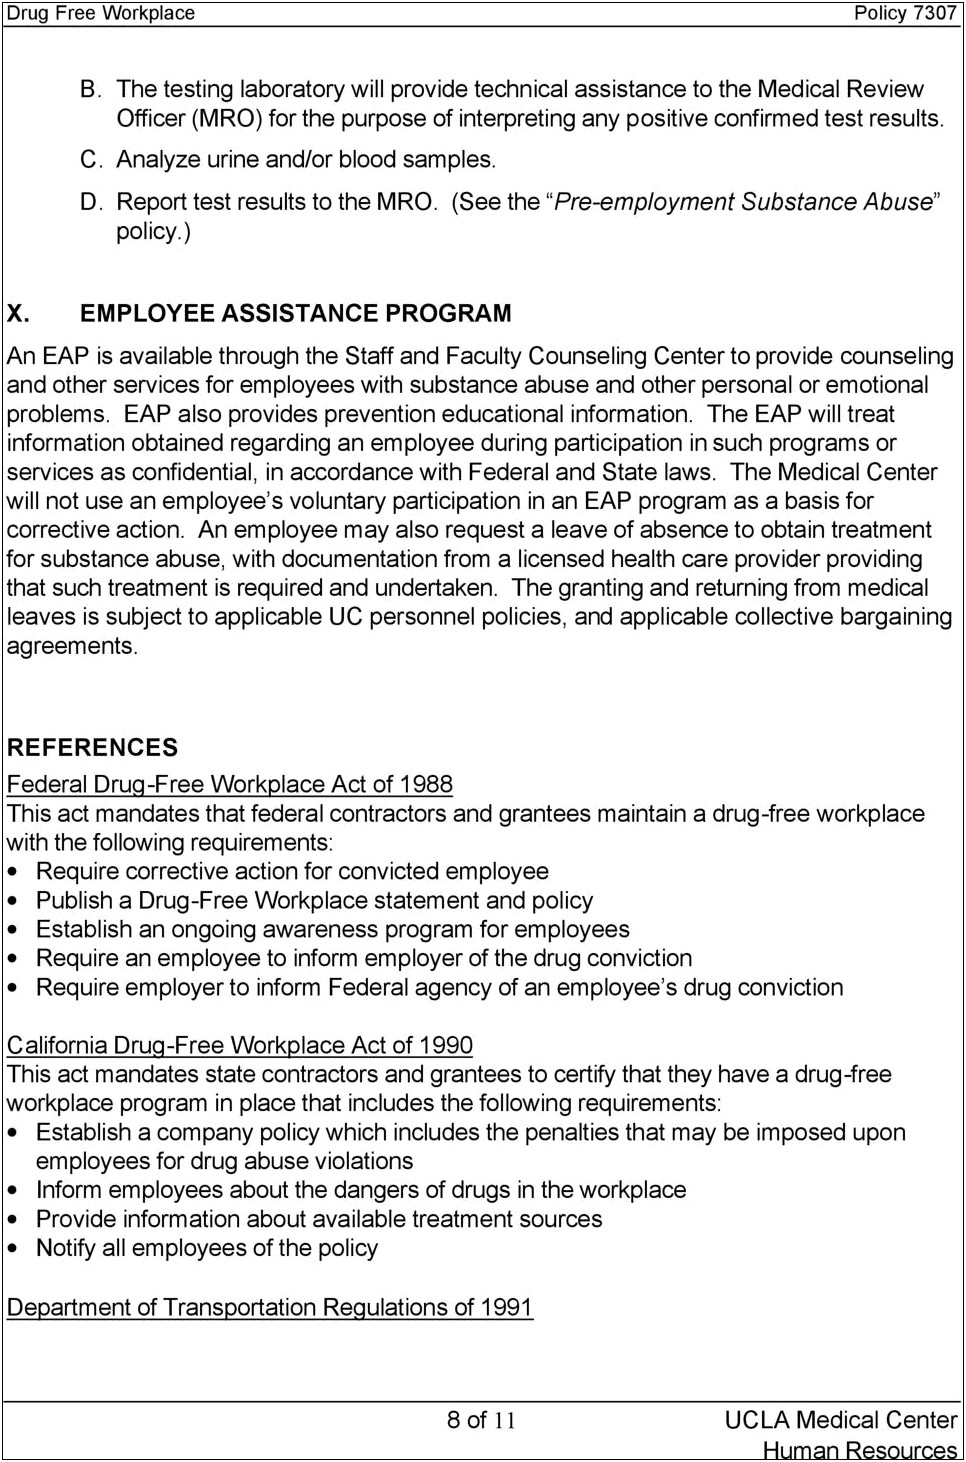 California Drug Free Workplace Policy Template